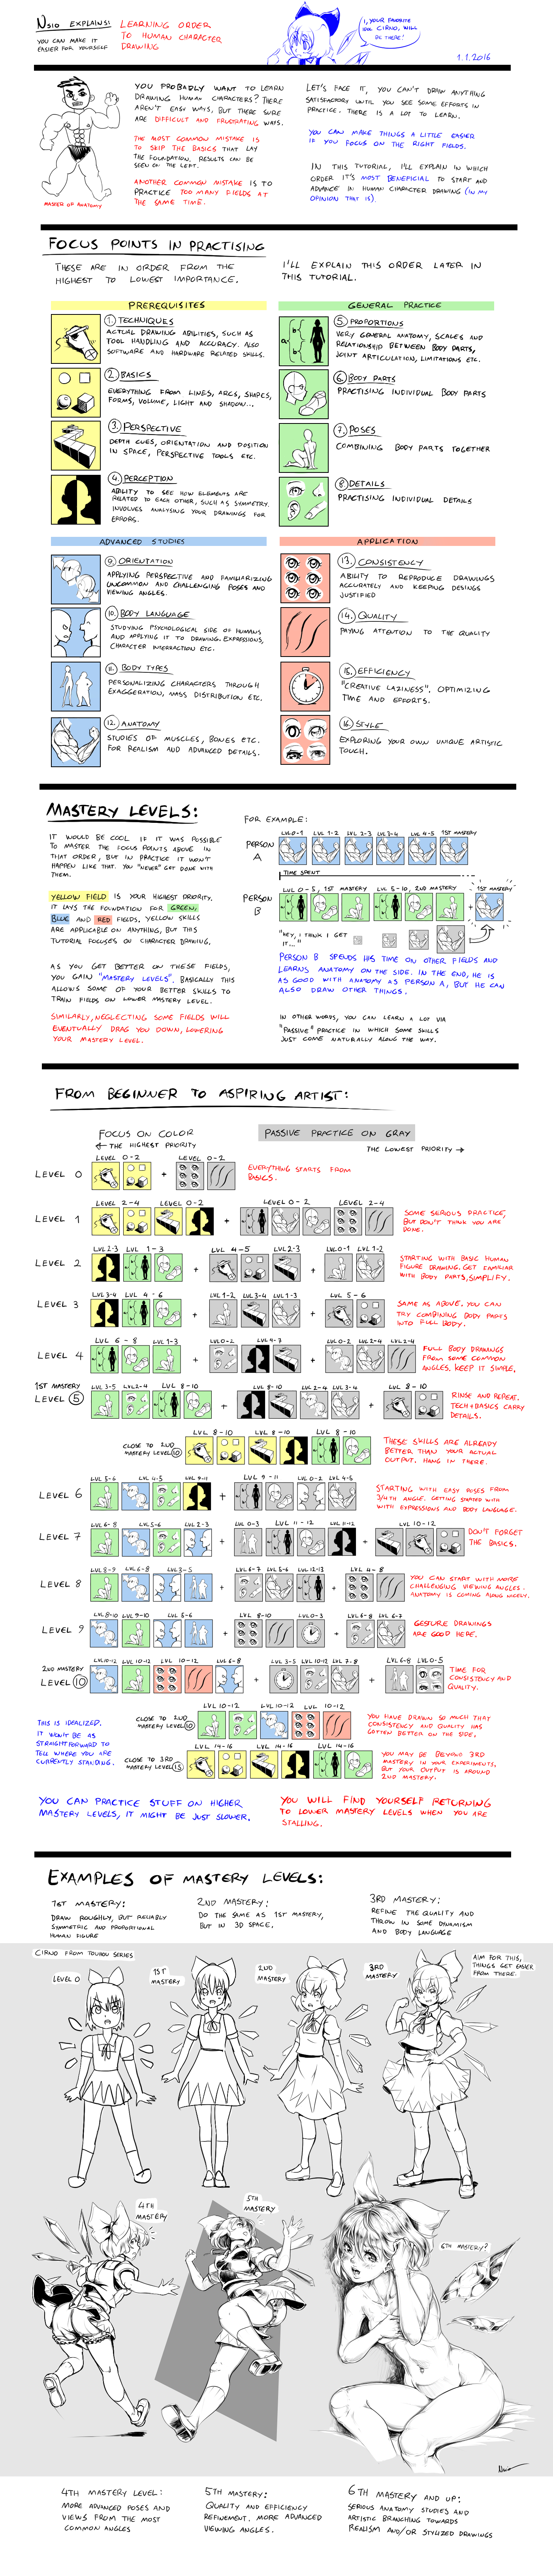 nsio_explains__learning_order_to_human_drawing_by_nsio-d9mc0ru.png